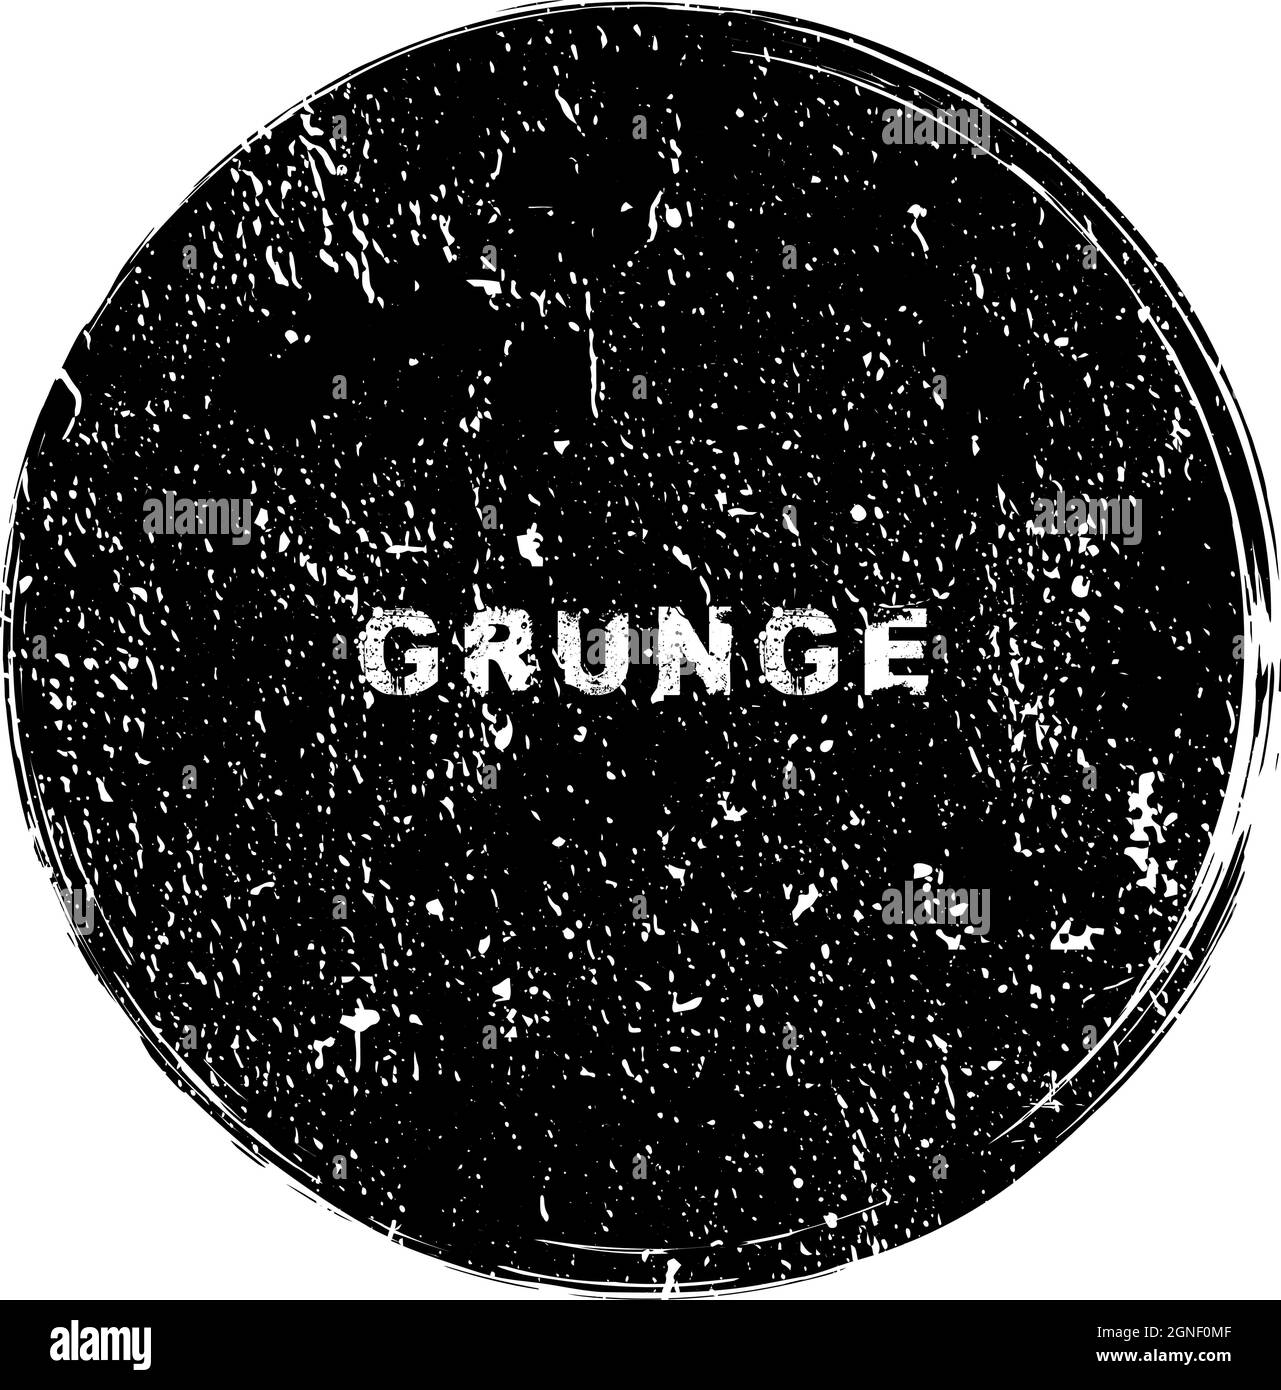 Grunge scratch stamp. Vector round shape. Distress textures. Blank dusty shape for banners, logo, insignias, icons, badges, emblems, labels Stock Vector